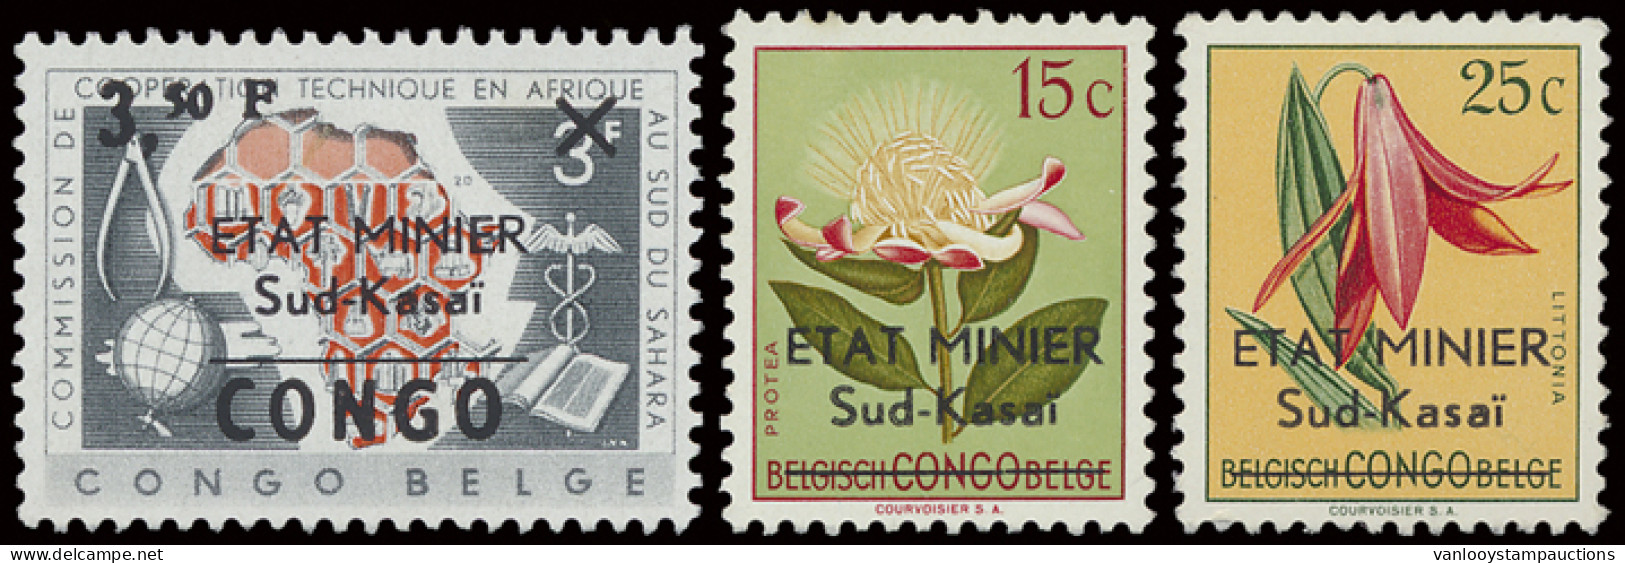 ** Lot Of 3 Stamps With Overprint ÉTAT MINIER SUD-KASAI, MNH, Very Scarce, Unlisted In OBP Catalogue, Only 3 Values Issu - Sur Kasai